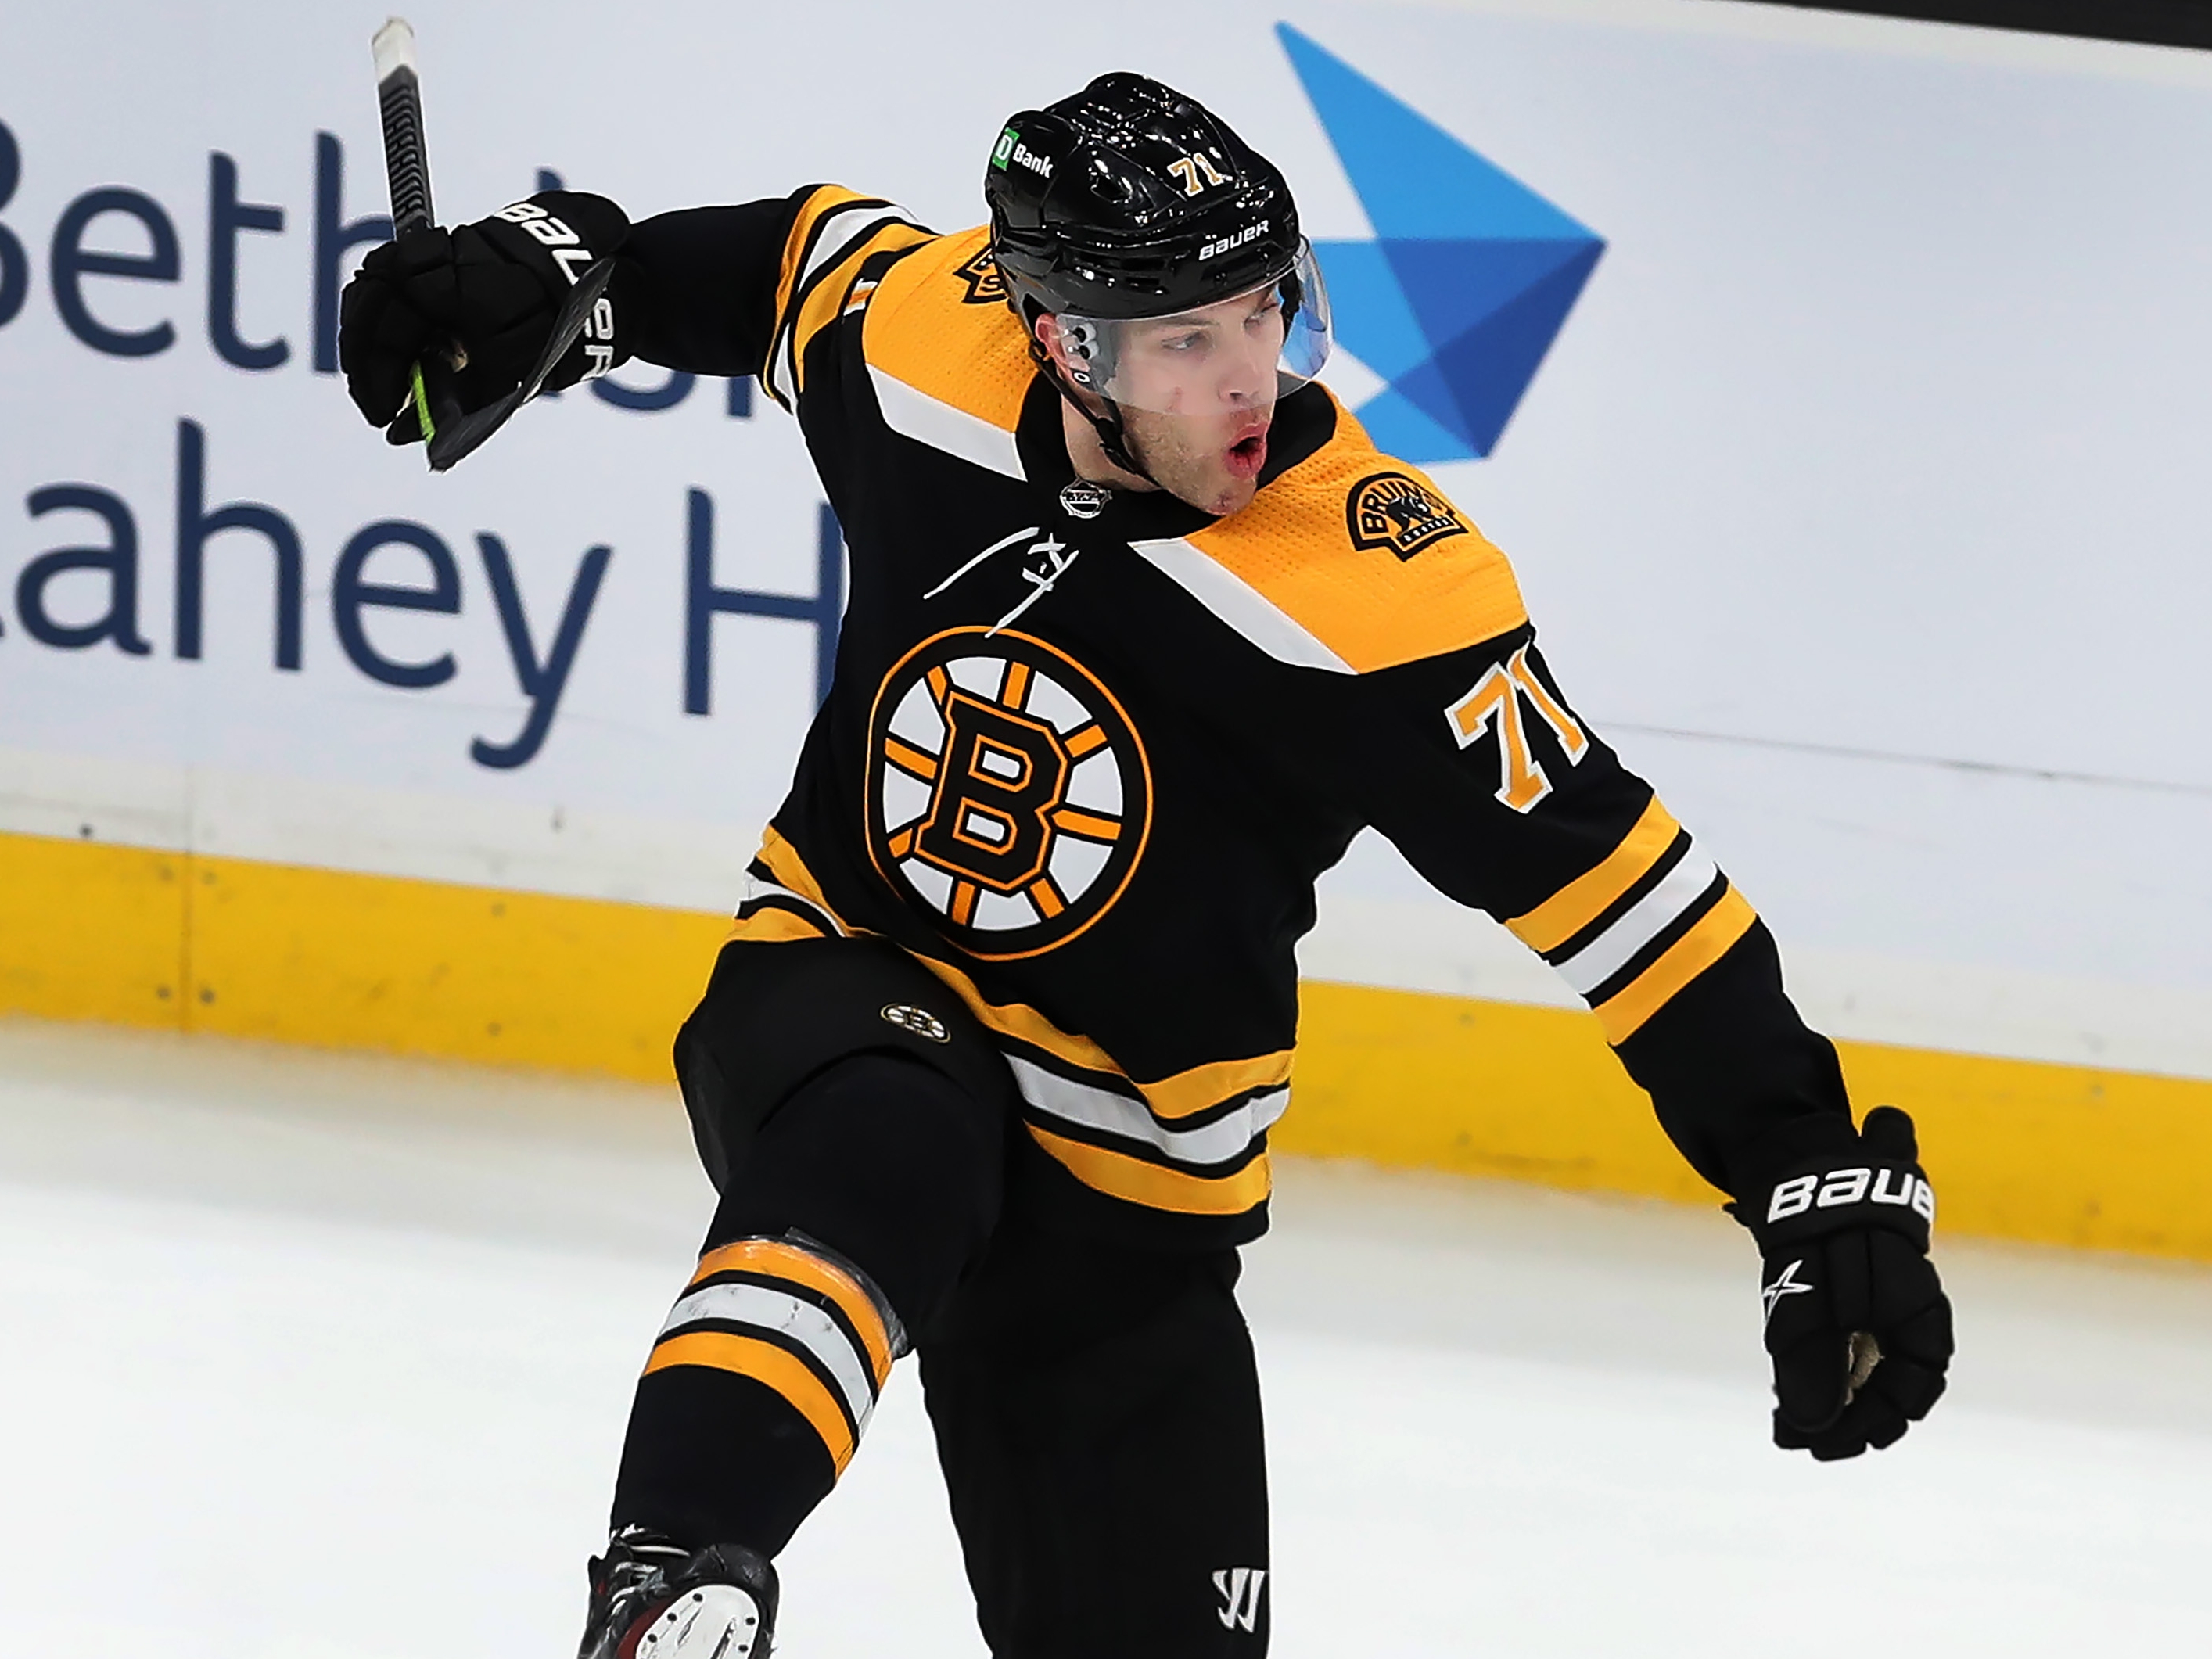 Bruins bring in proven players in deals before deadline